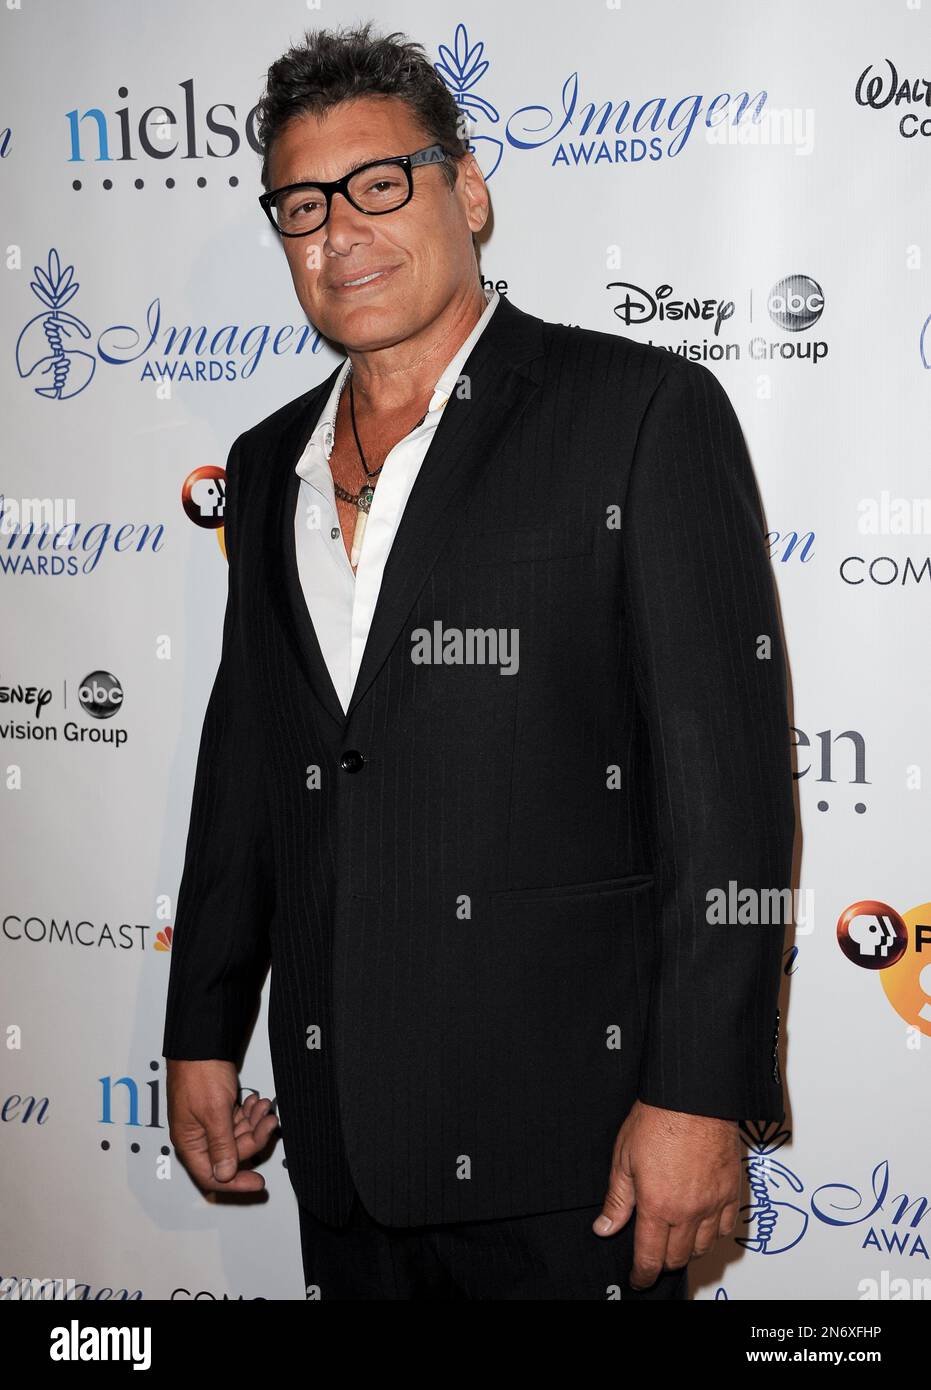 Steven Bauer Arrives At The 28th Annual Imagen Awards At The Beverly